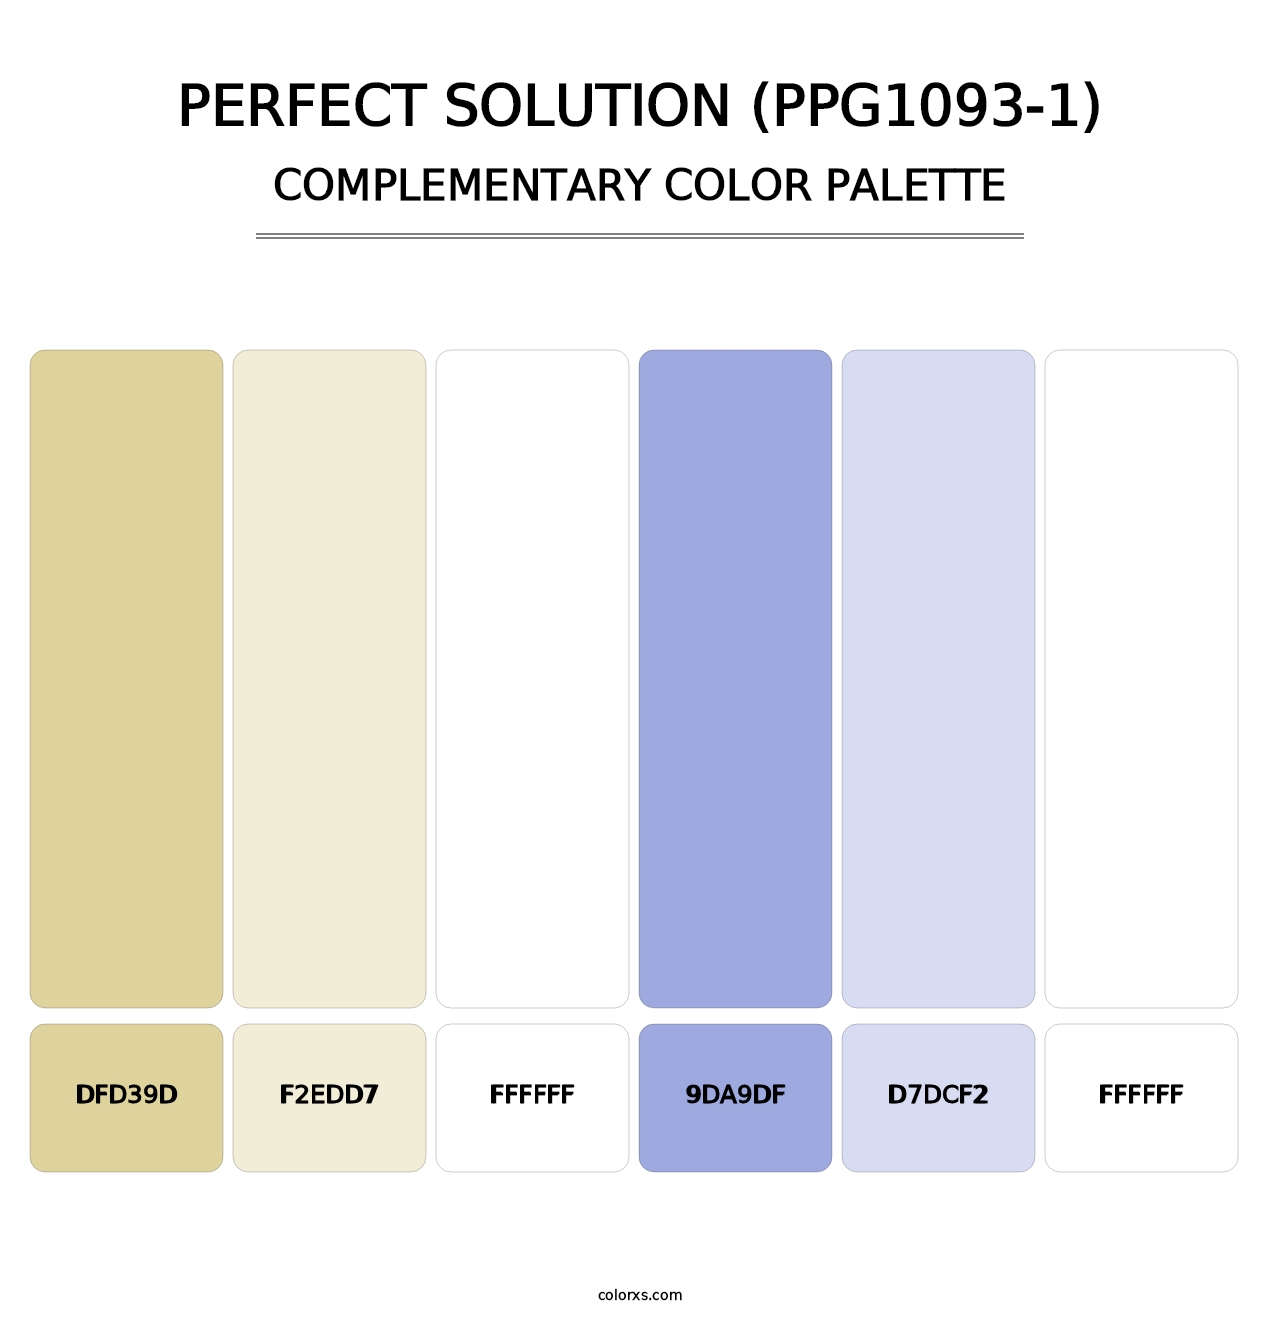 Perfect Solution (PPG1093-1) - Complementary Color Palette